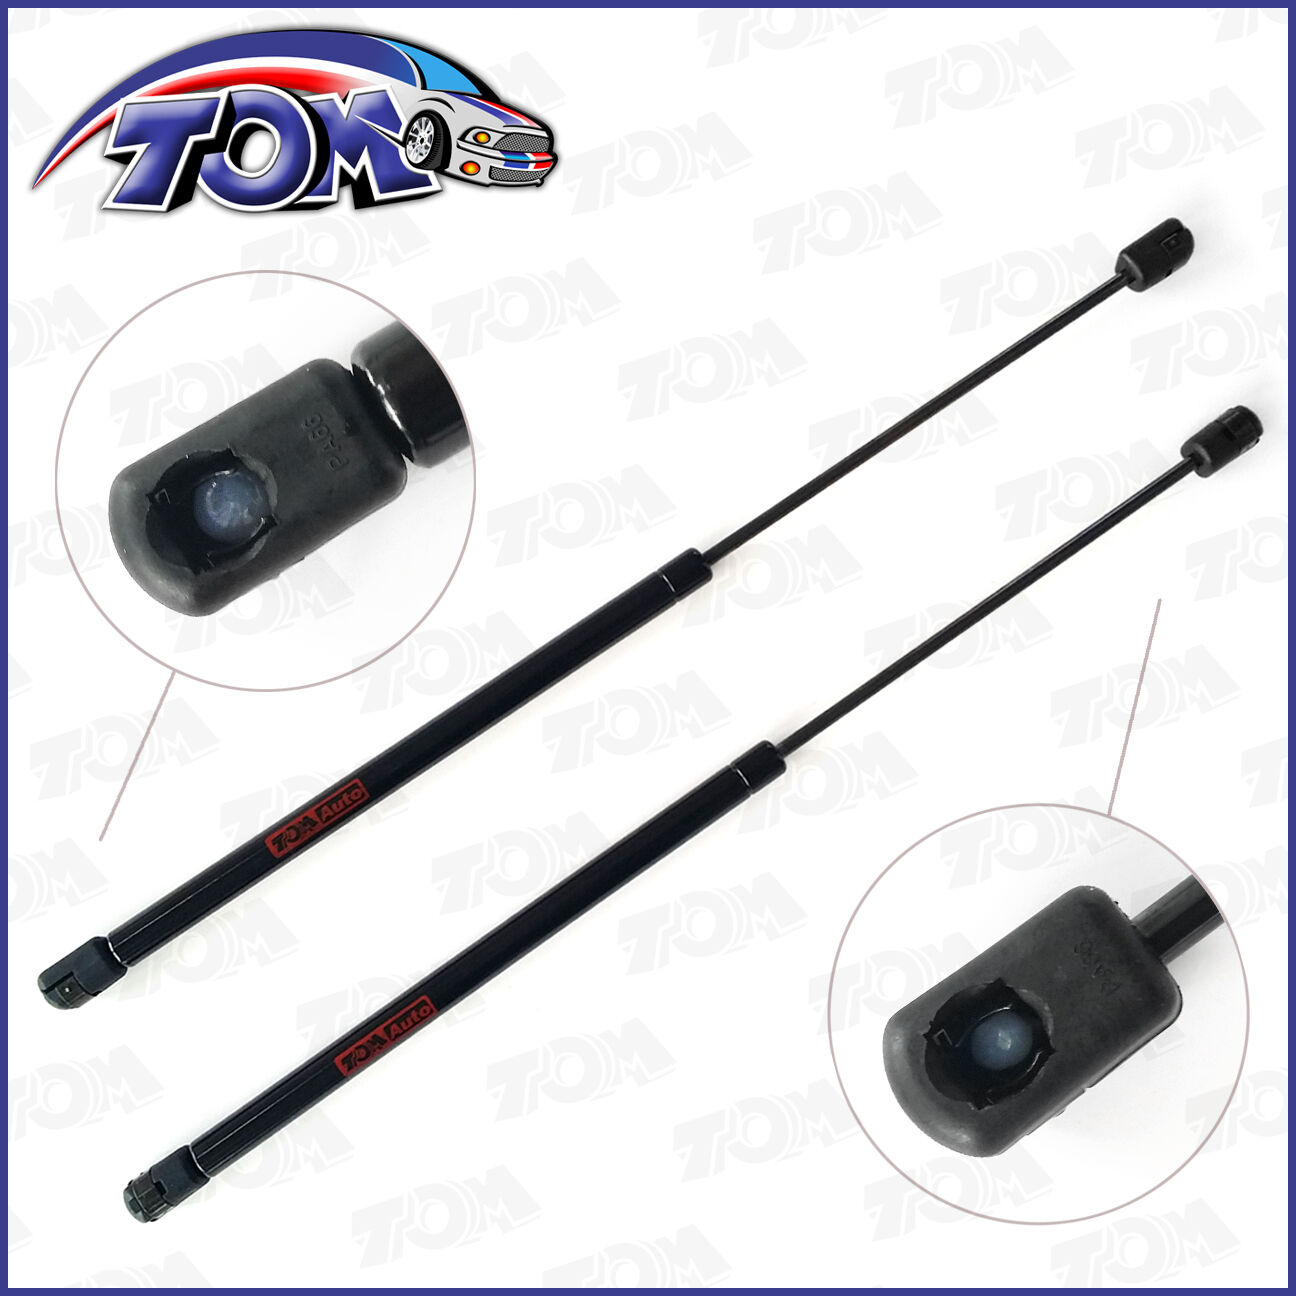 Brand New Rear Trunk Lift Support Struts For Ford Mustang 94-04